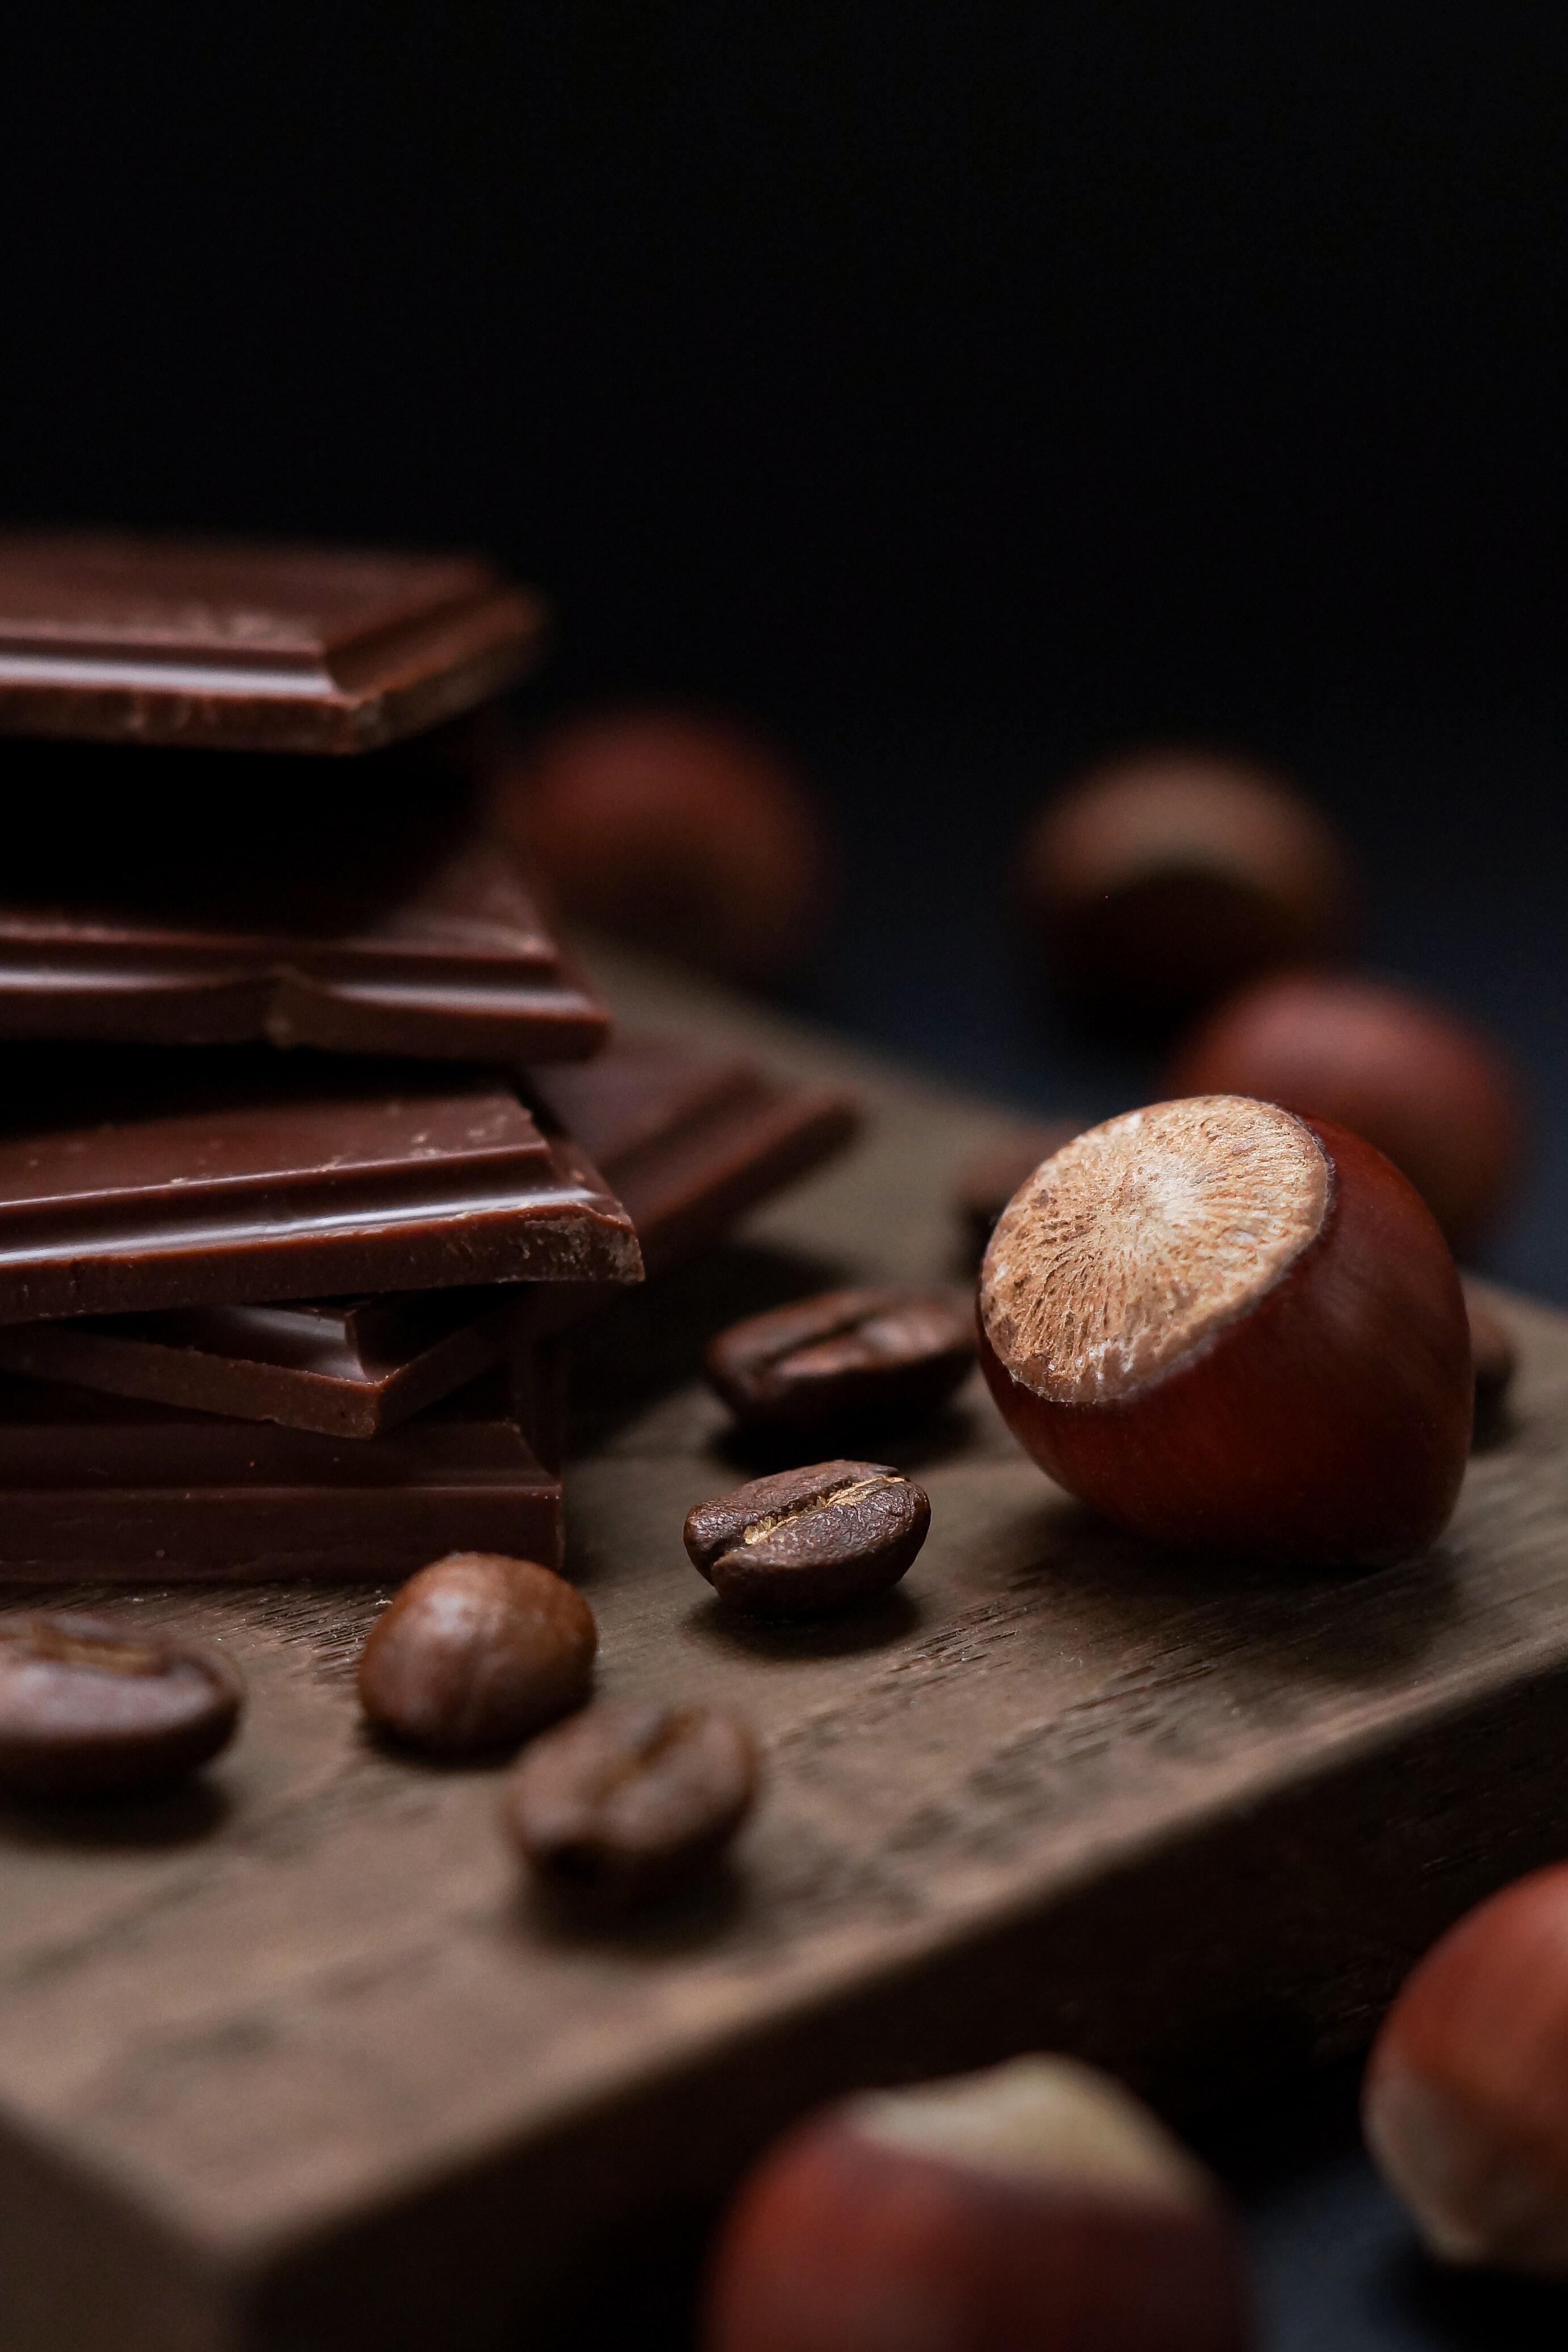 Chocolate And Dry Fruit Hd Wallpaper